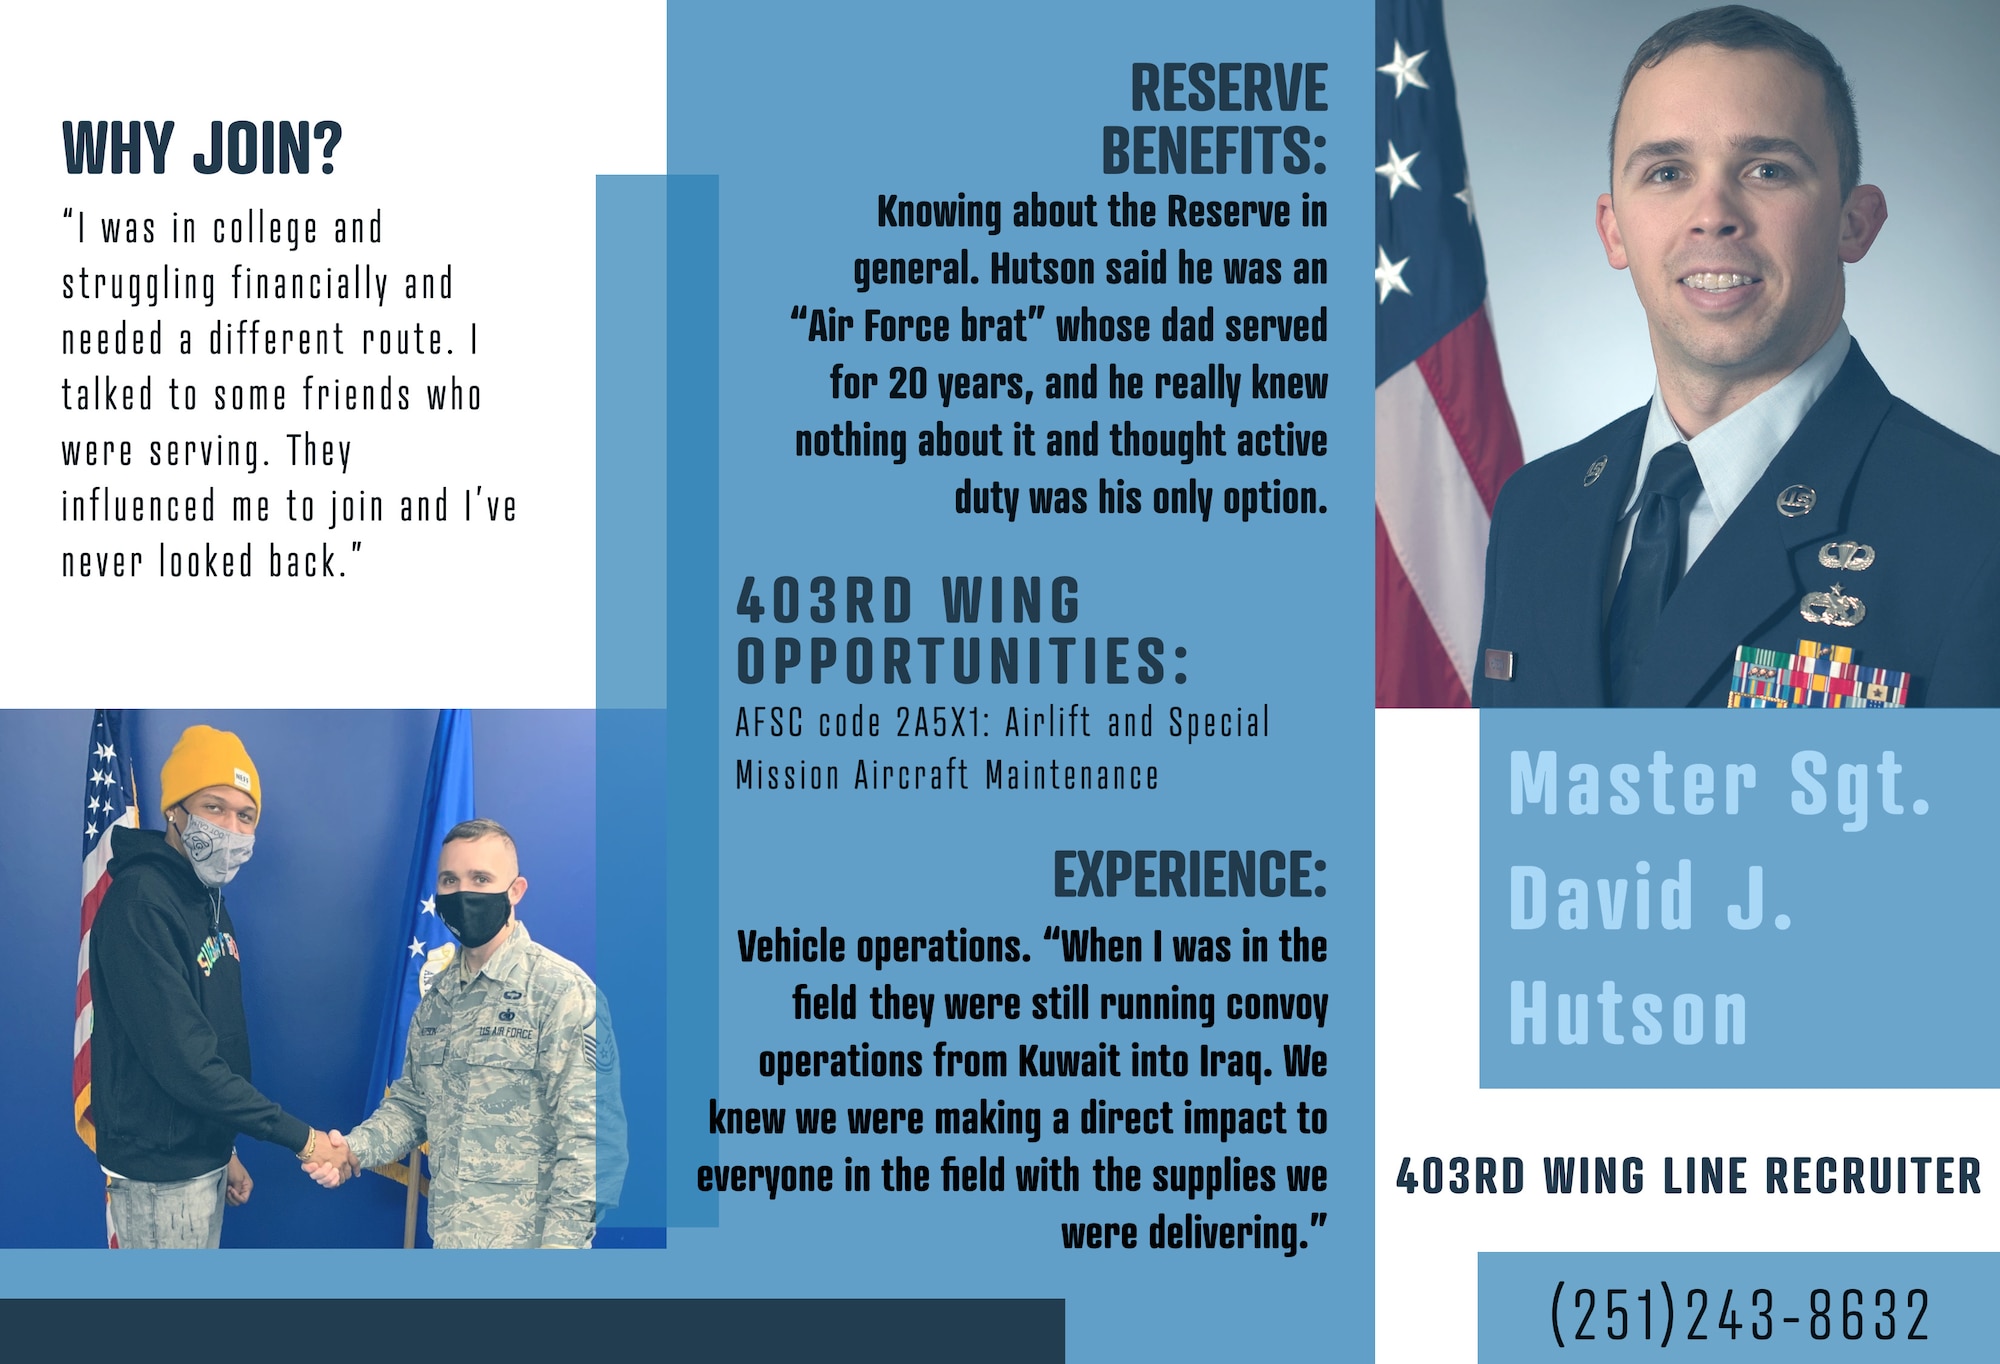 This graphic is part three of a series. Master Sgt. David J. Hutson is a line recruiter with the Air Force Reserve 403rd Wing. Hutson served 13 years on active duty before joining the Air Force Reserve 3 years ago, and he has a decade of experience in the recruiting field. (U.S. Air Force graphic by Staff Sgt. Kristen Pittman)